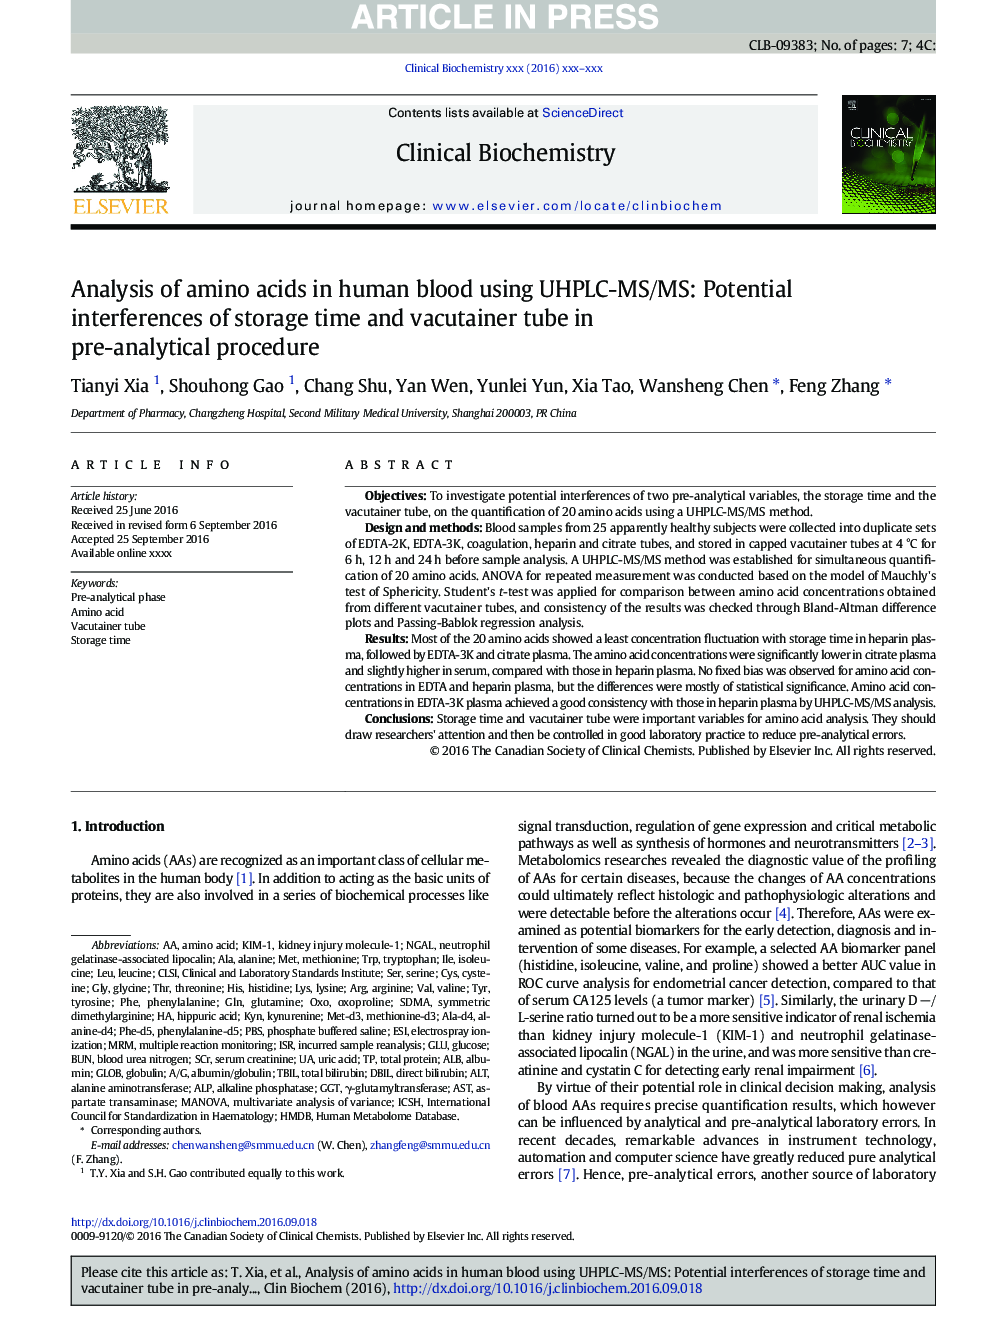 Analysis of amino acids in human blood using UHPLC-MS/MS: Potential interferences of storage time and vacutainer tube in pre-analytical procedure